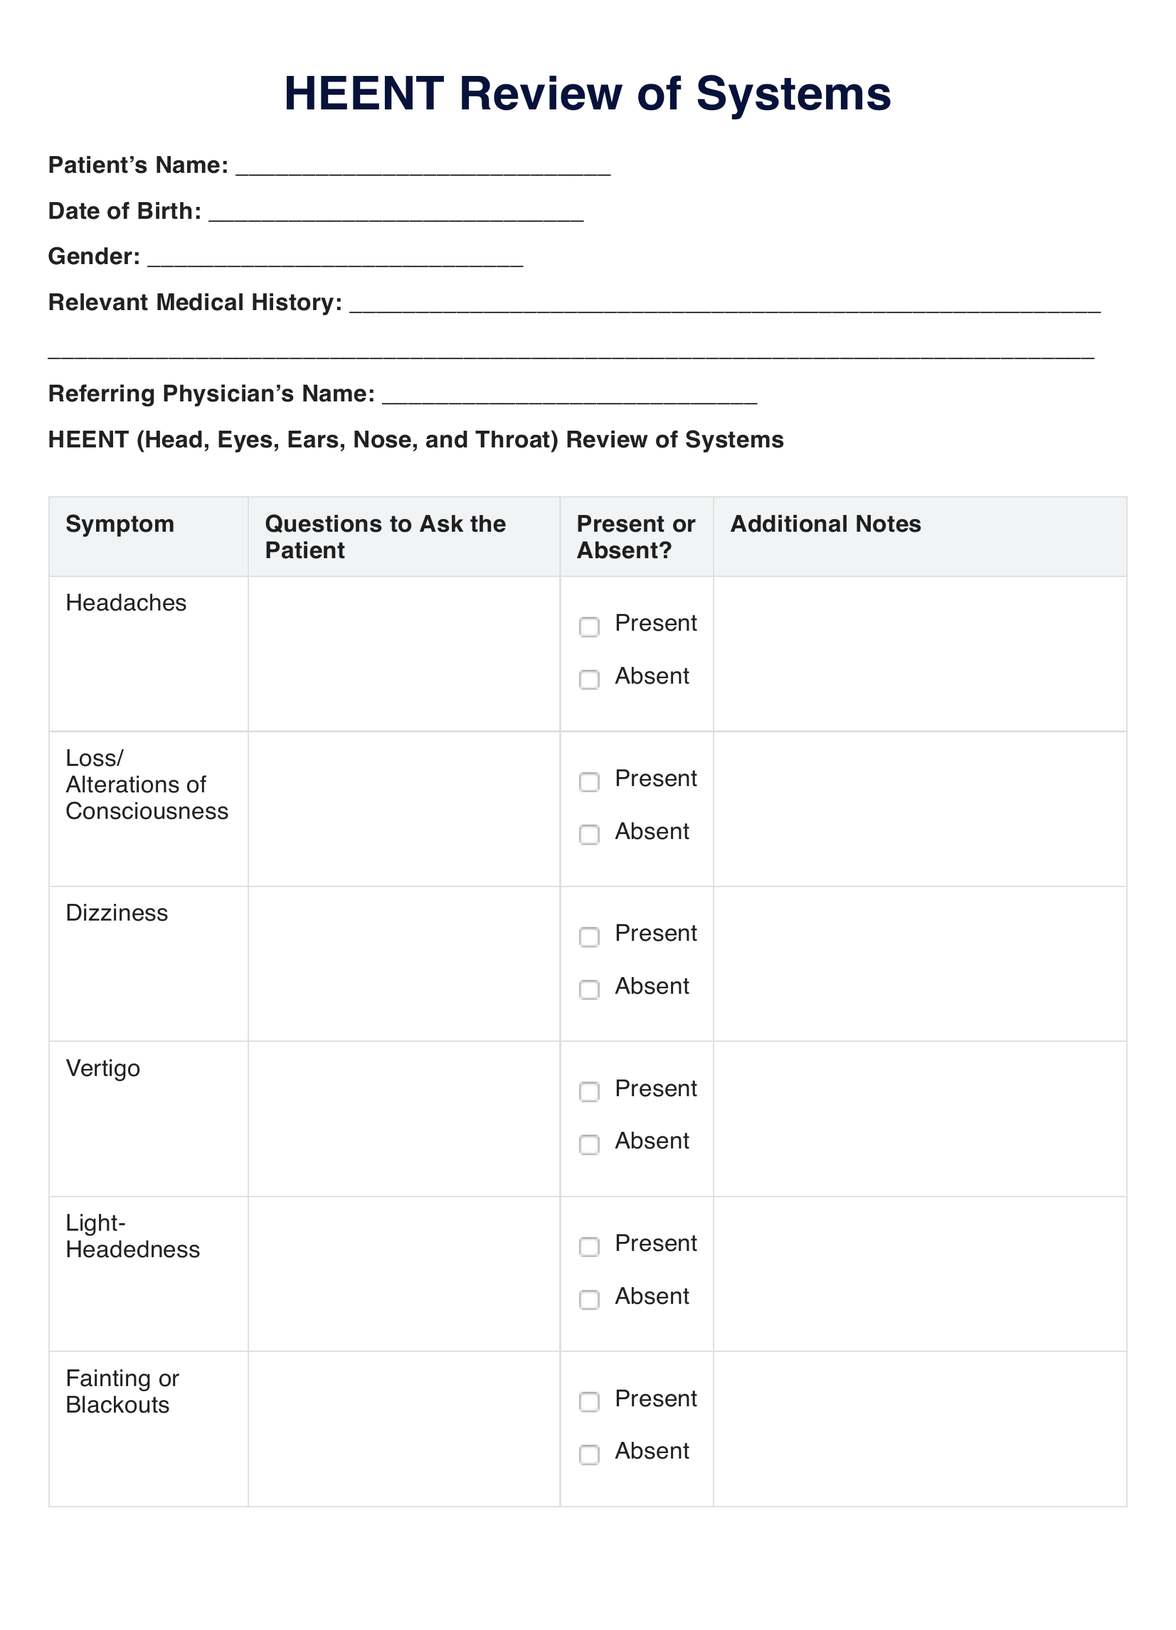 HEENT Review Of Systems Template PDF Example